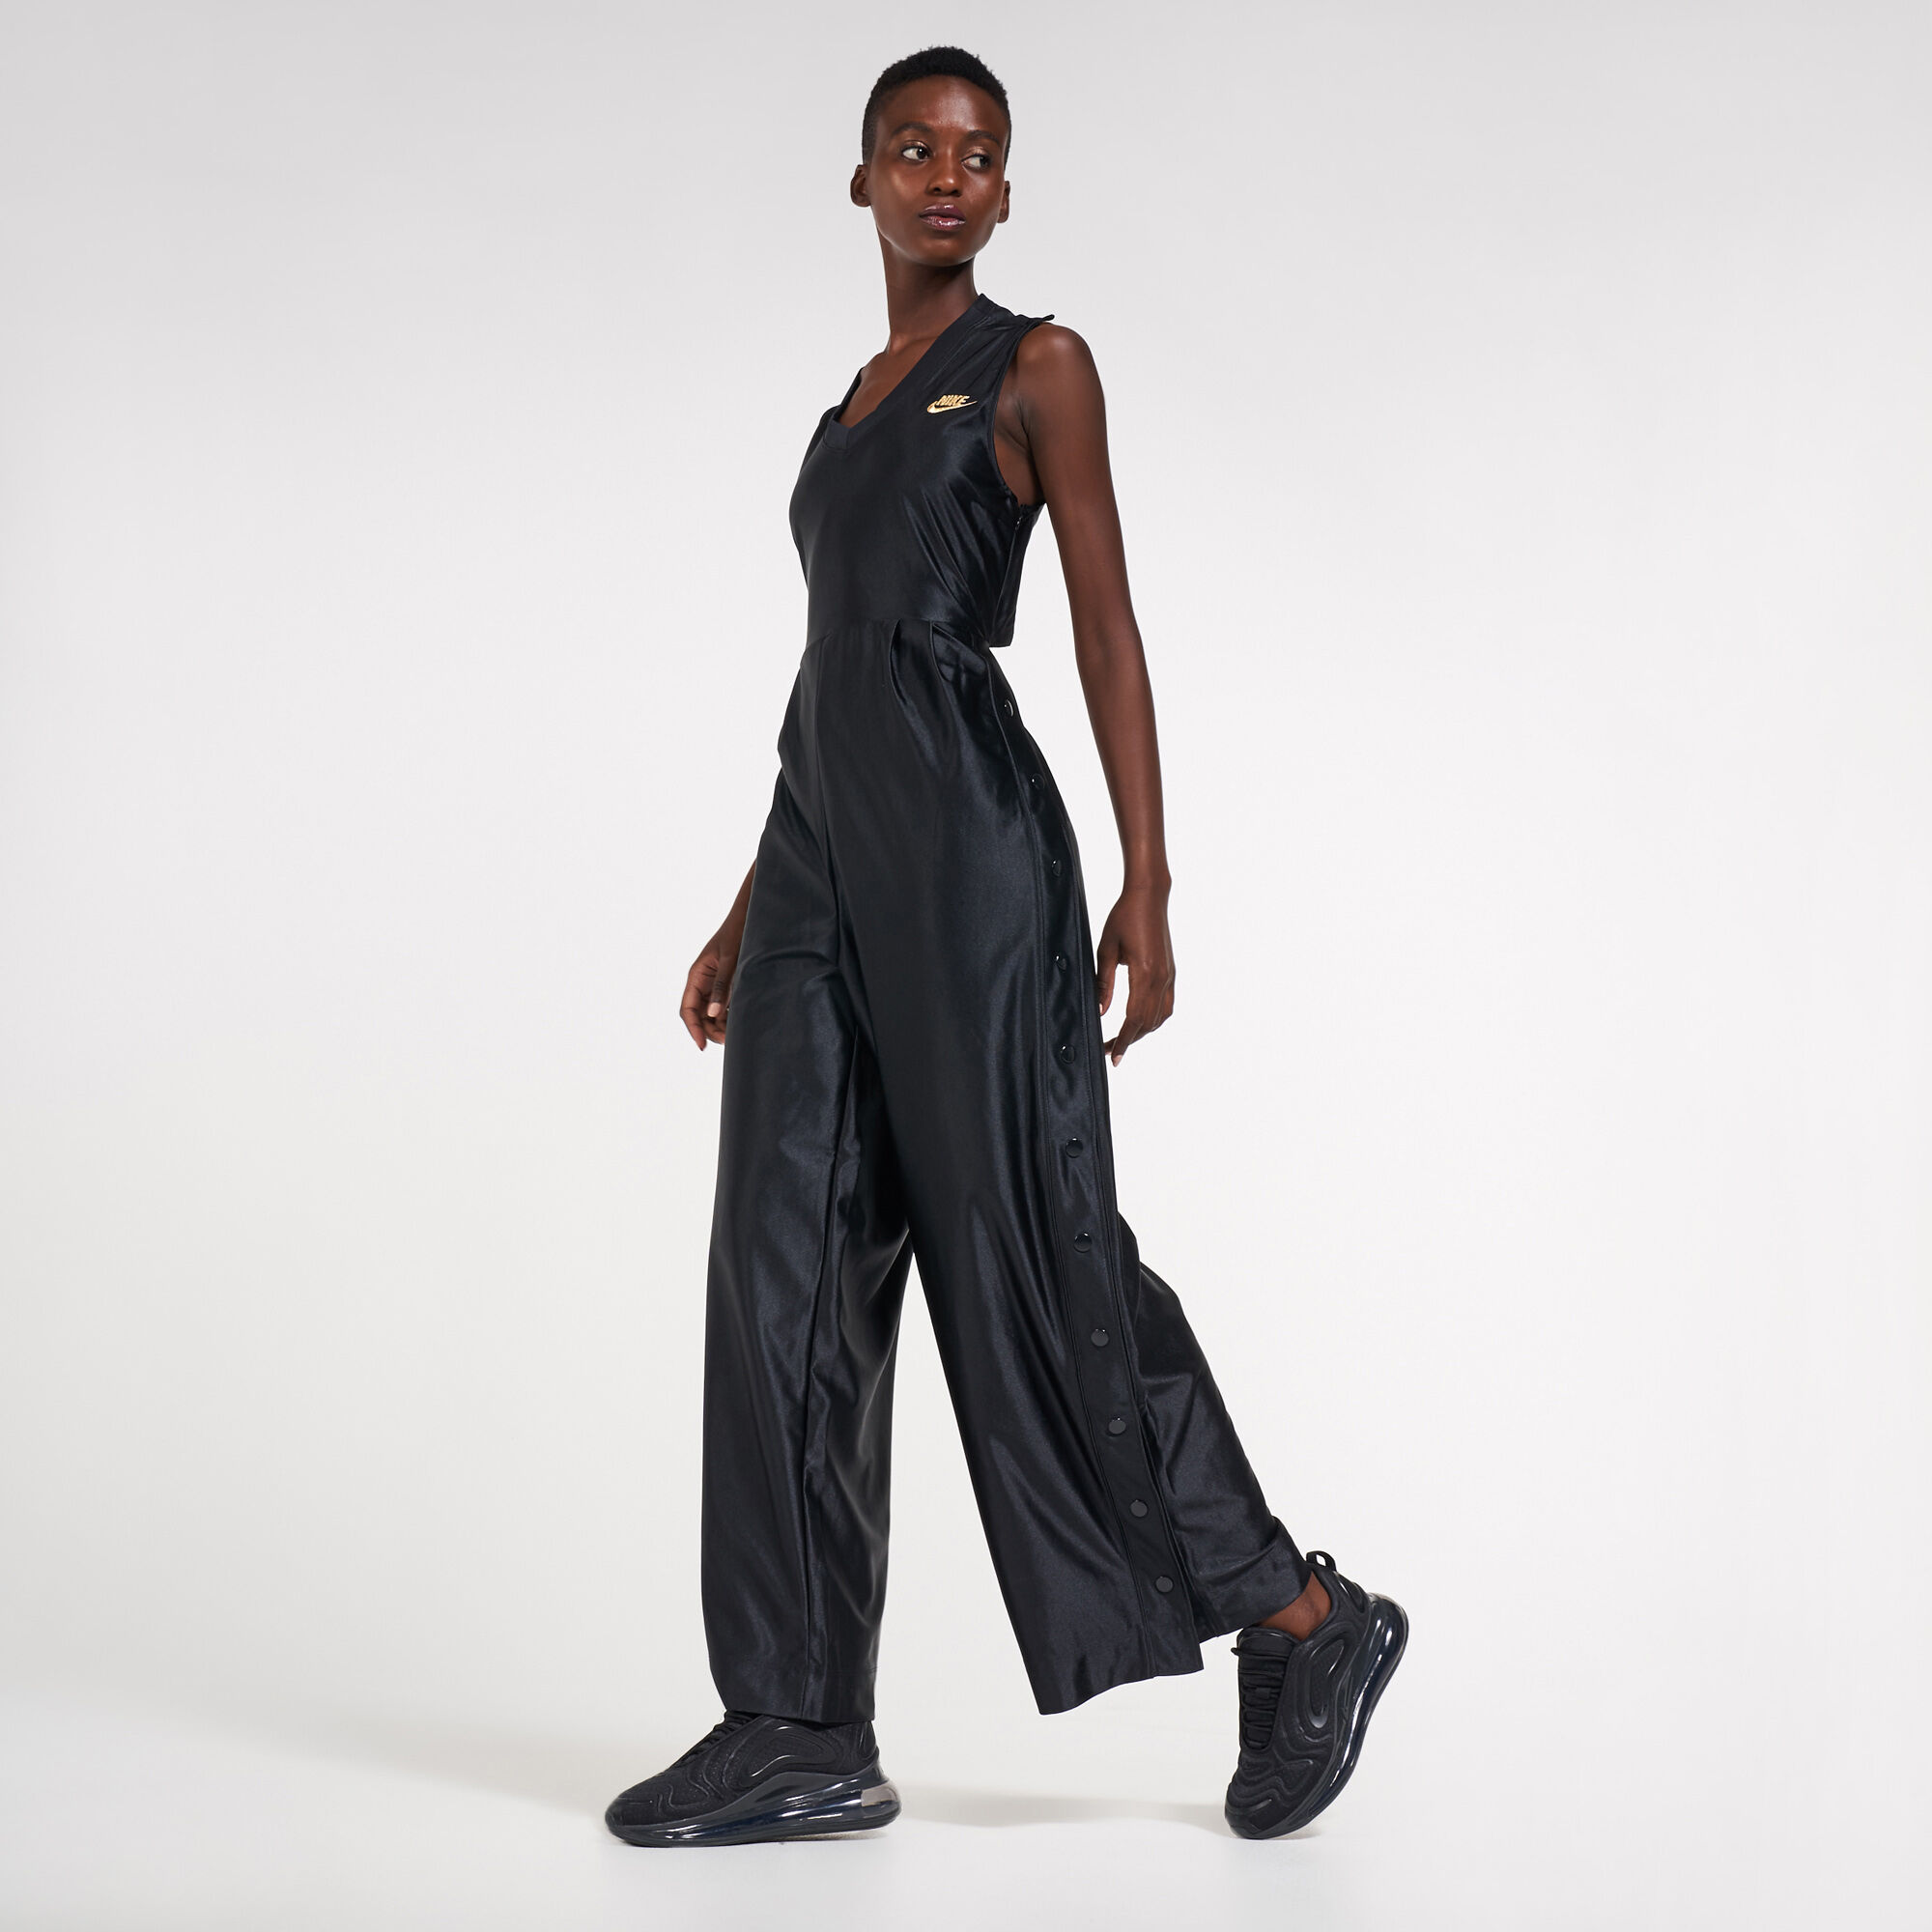 NIKE SPORTSWEAR ICON CLASH WOMENS JUMPSUIT BRAND NEW WITH TAGS Size Small  £79.99 - PicClick UK